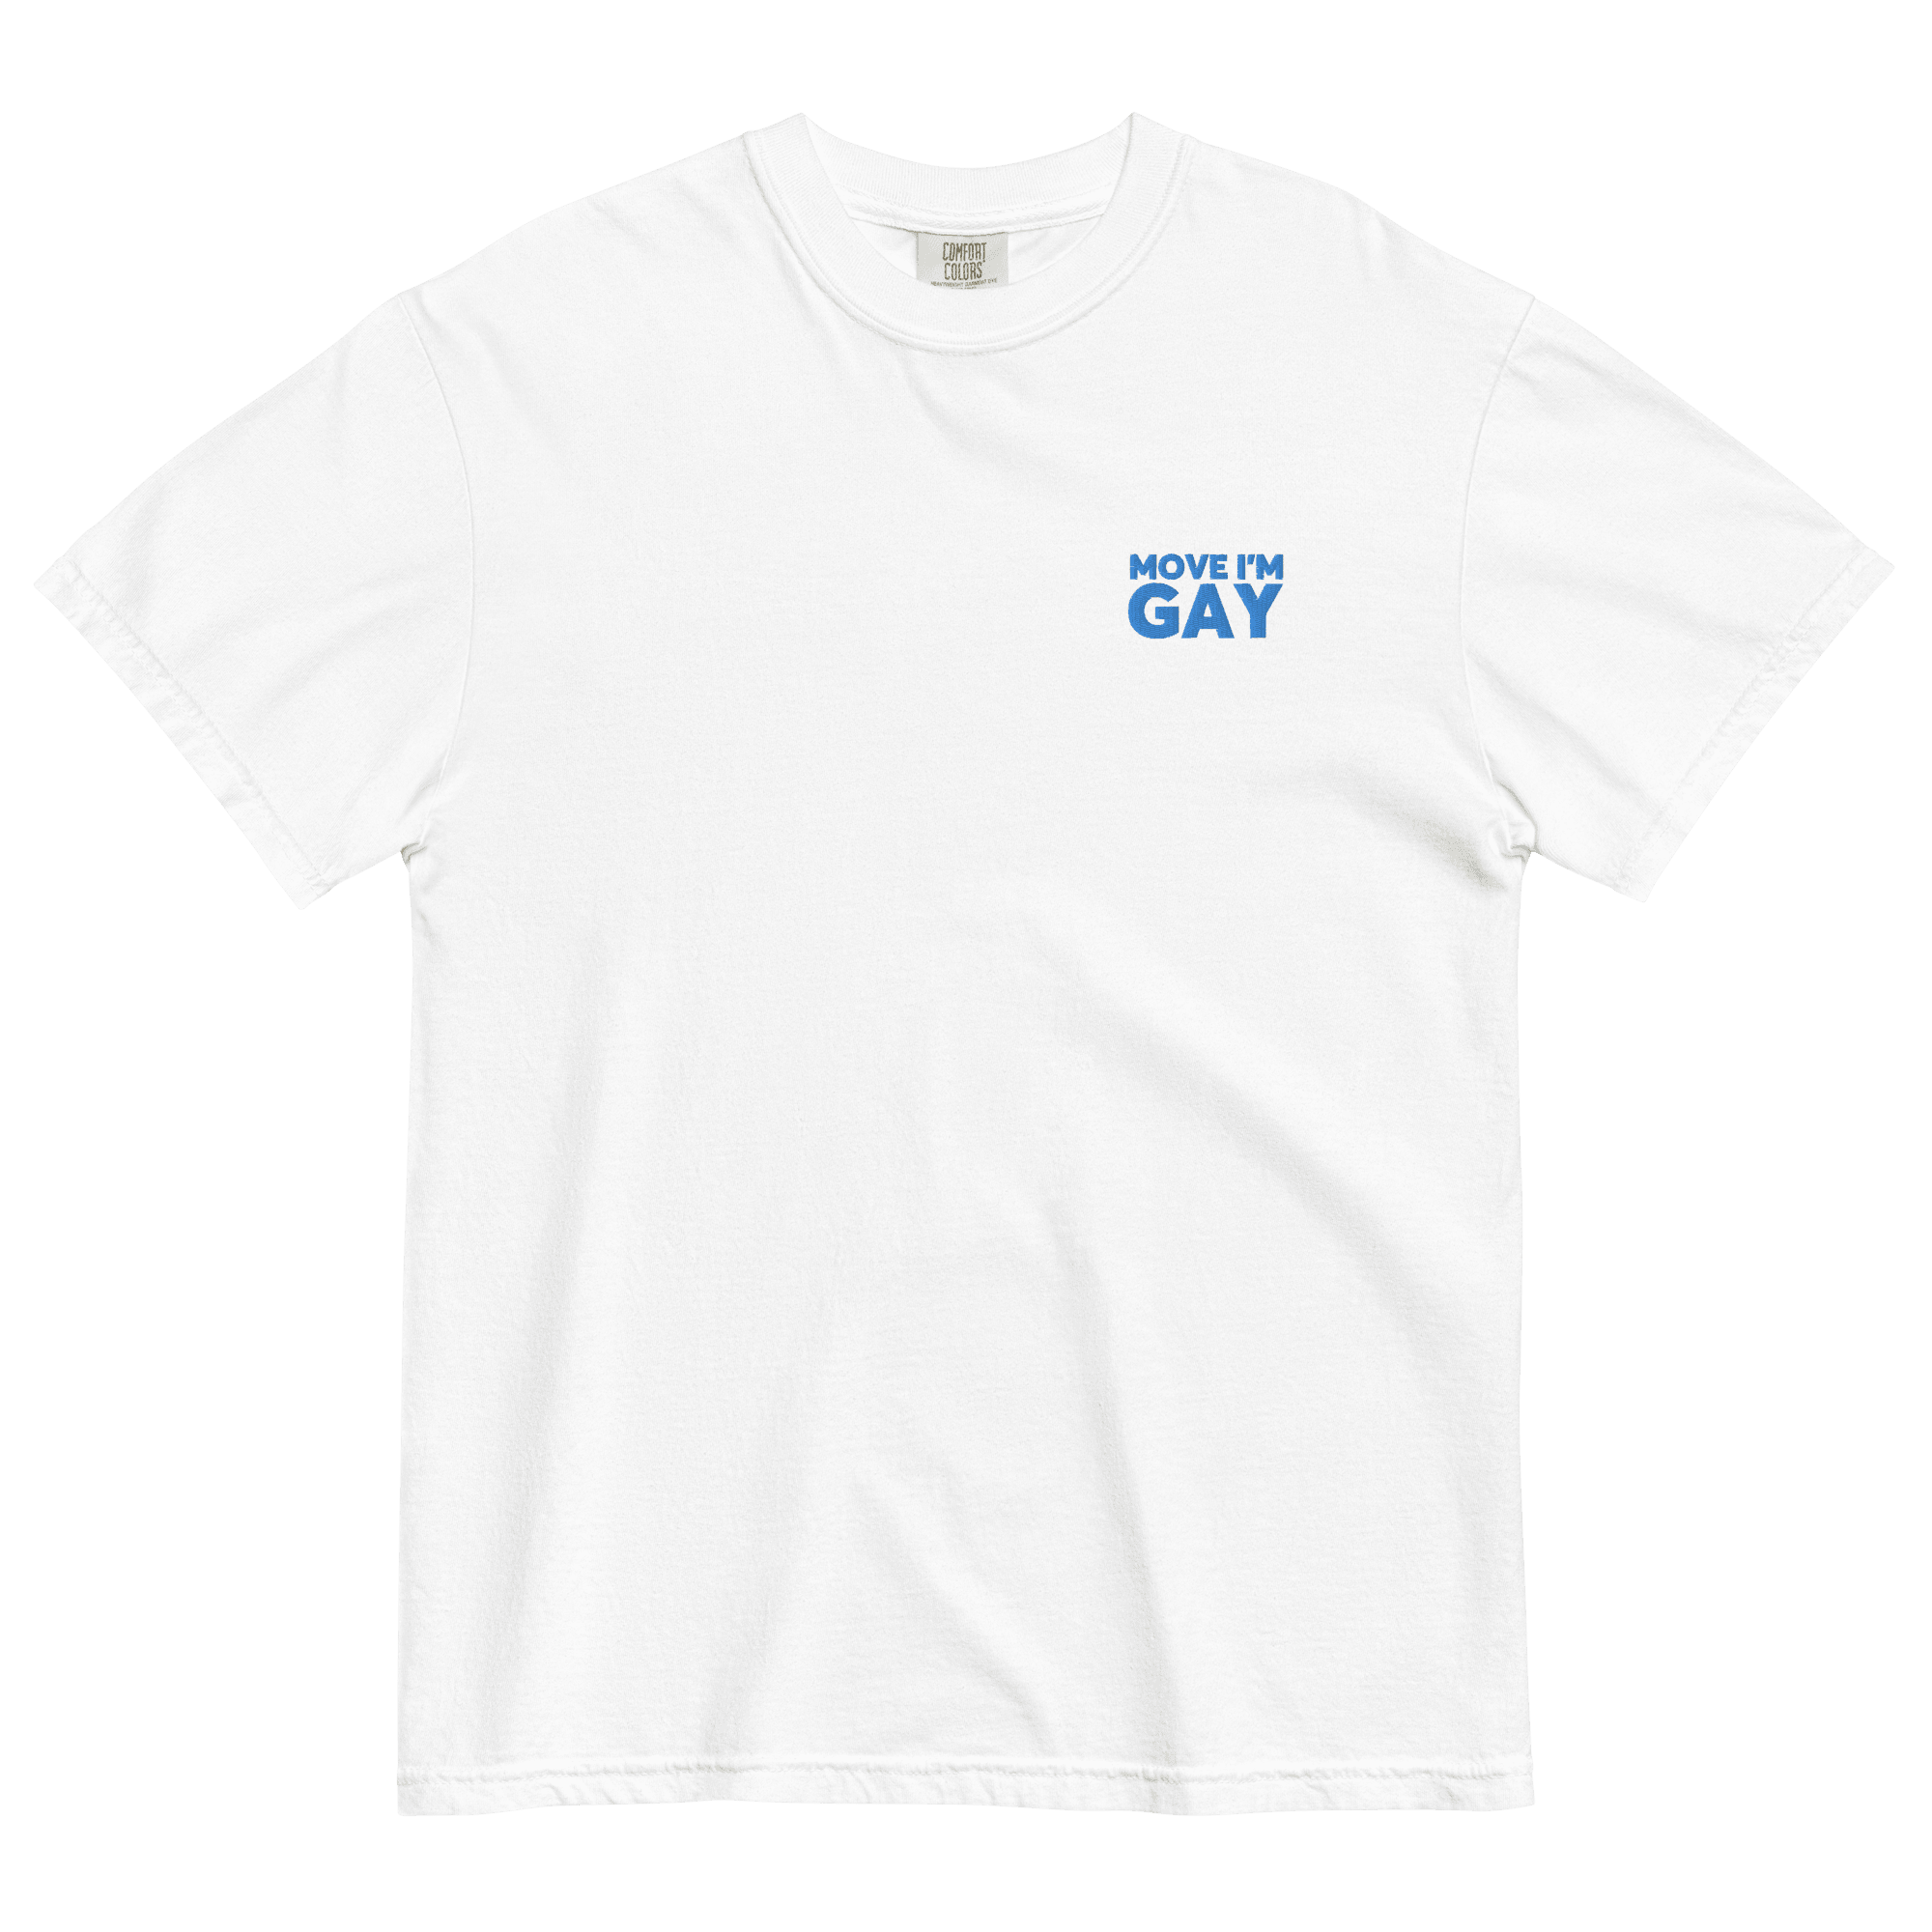 Move I'm GAY Embroidered Shirt for Pride - Polychrome Goods 🍊